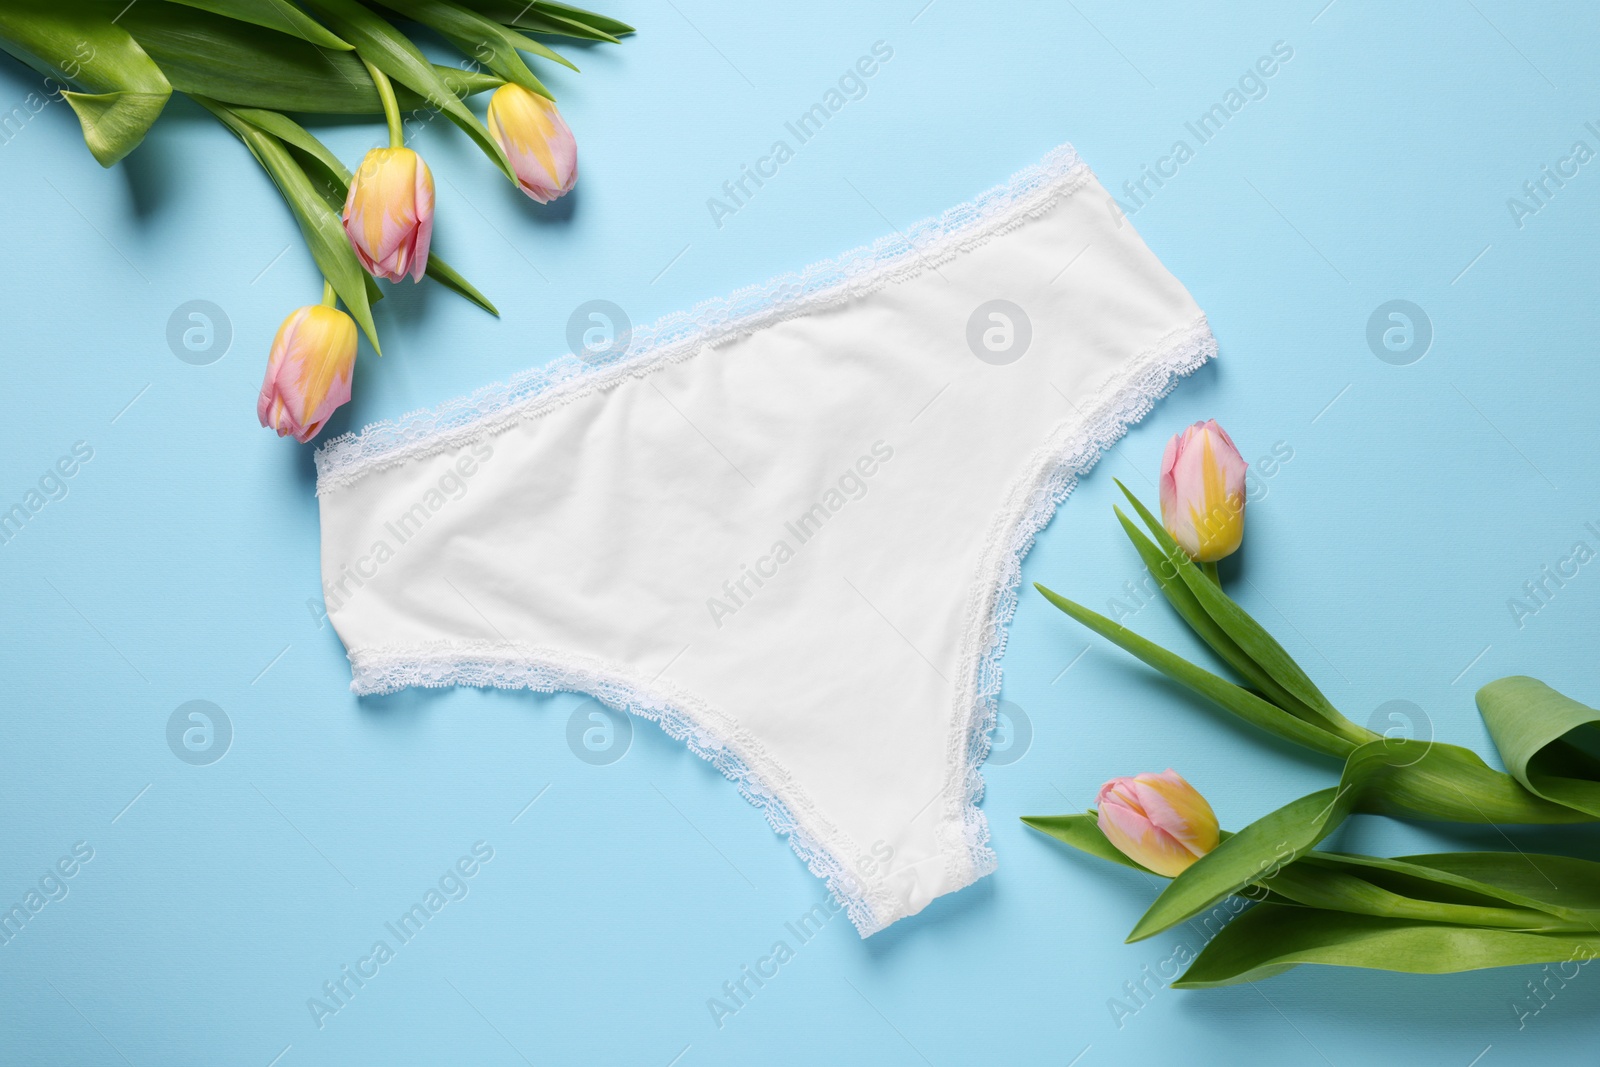 Photo of Comfortable white women's underwear and beautiful tulips on light blue background, flat lay